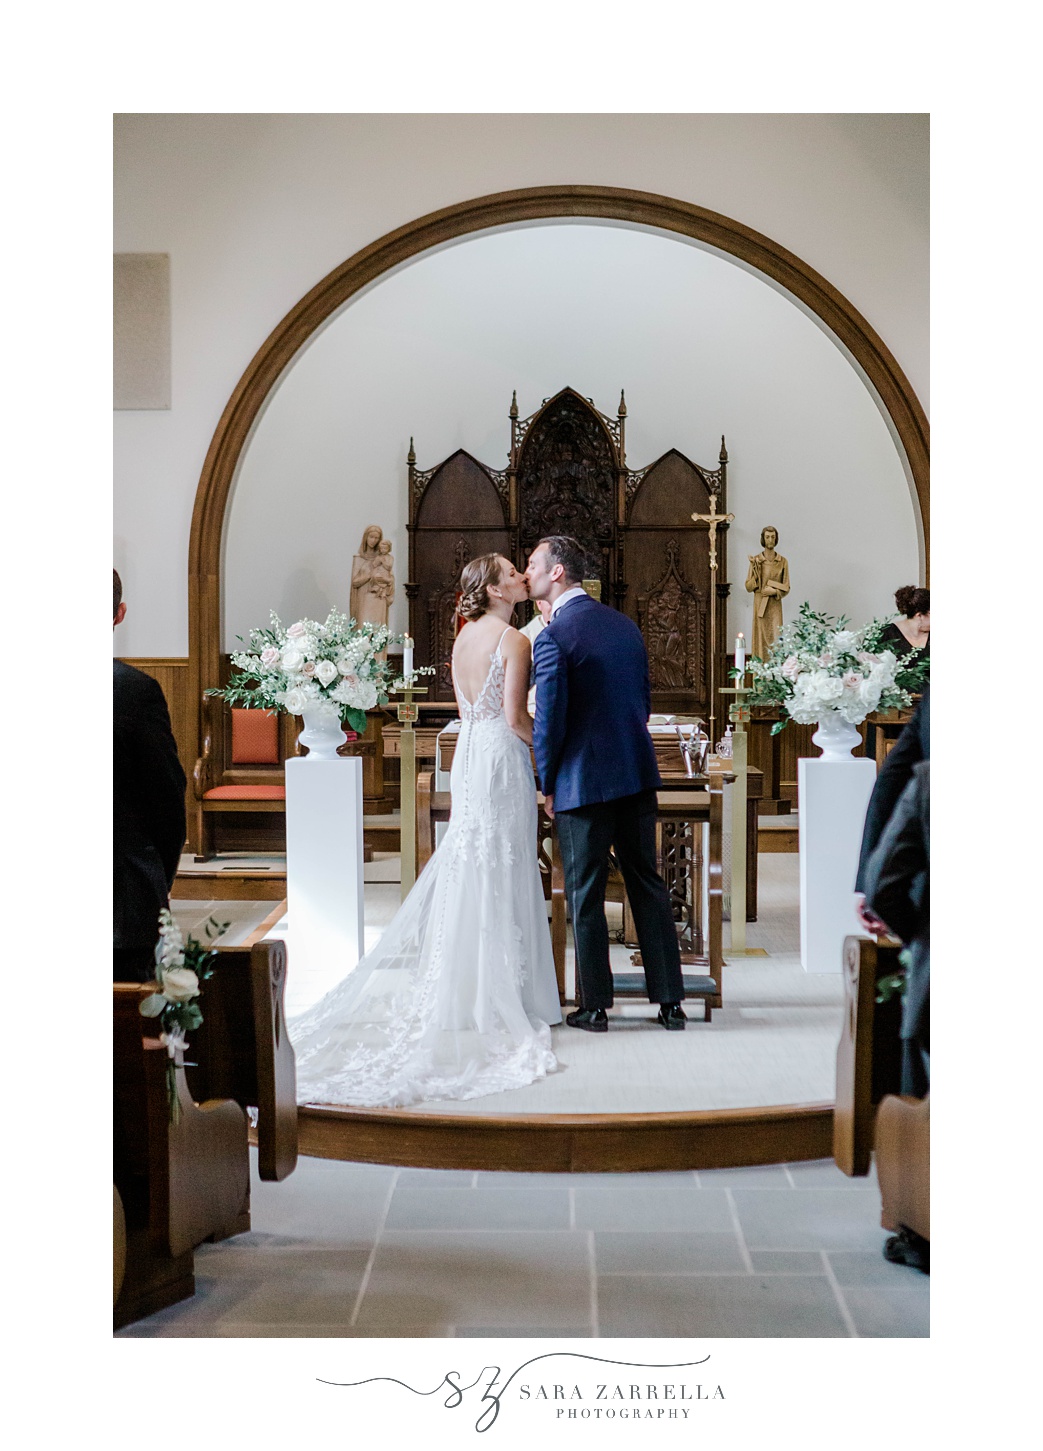 bride and groom kiss near alter during wedding ceremony at Our Lady of Mercy Chapel at Salve Regina University